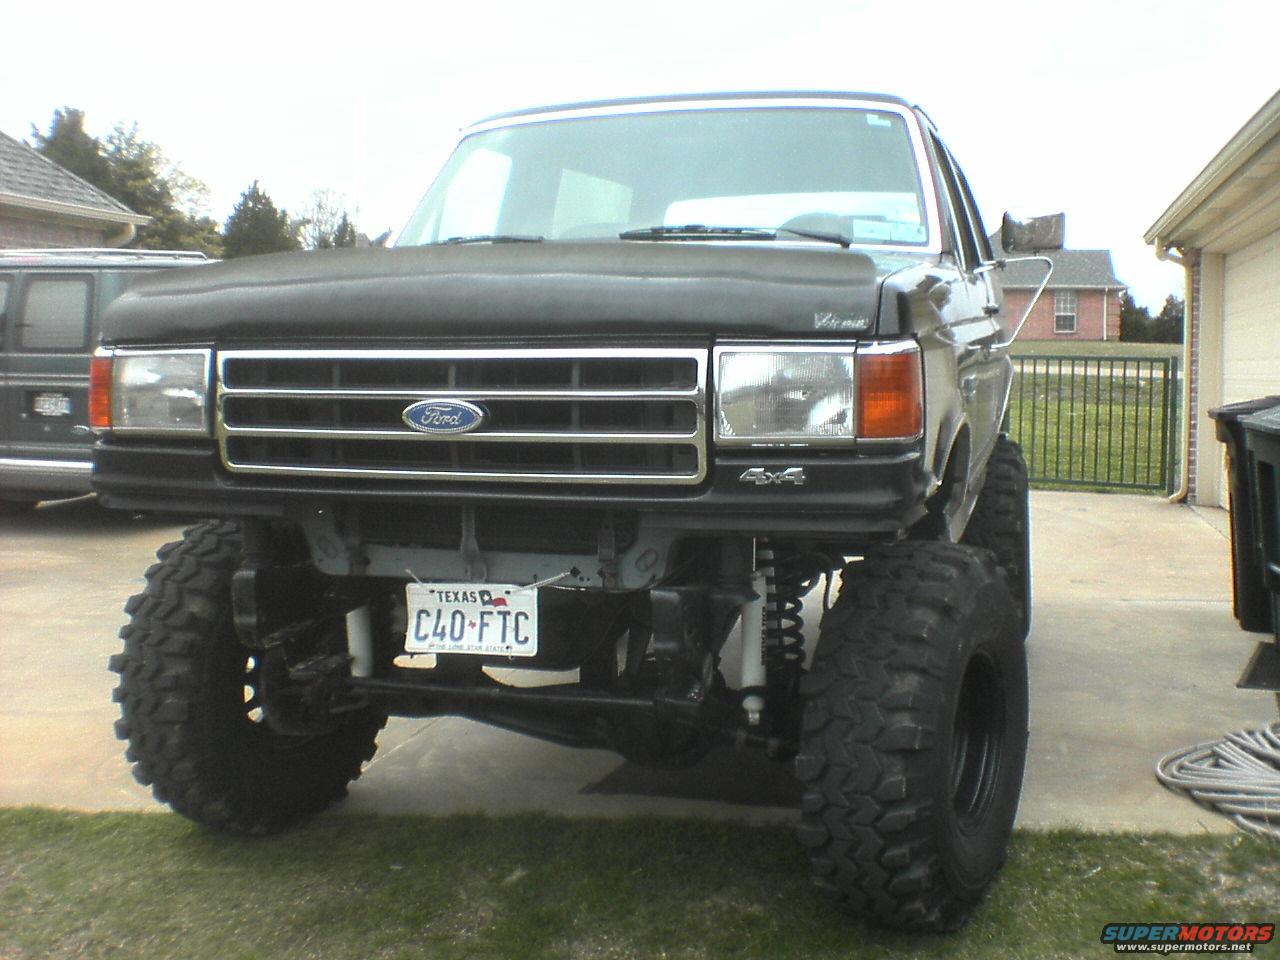 Body lifts for ford bronco